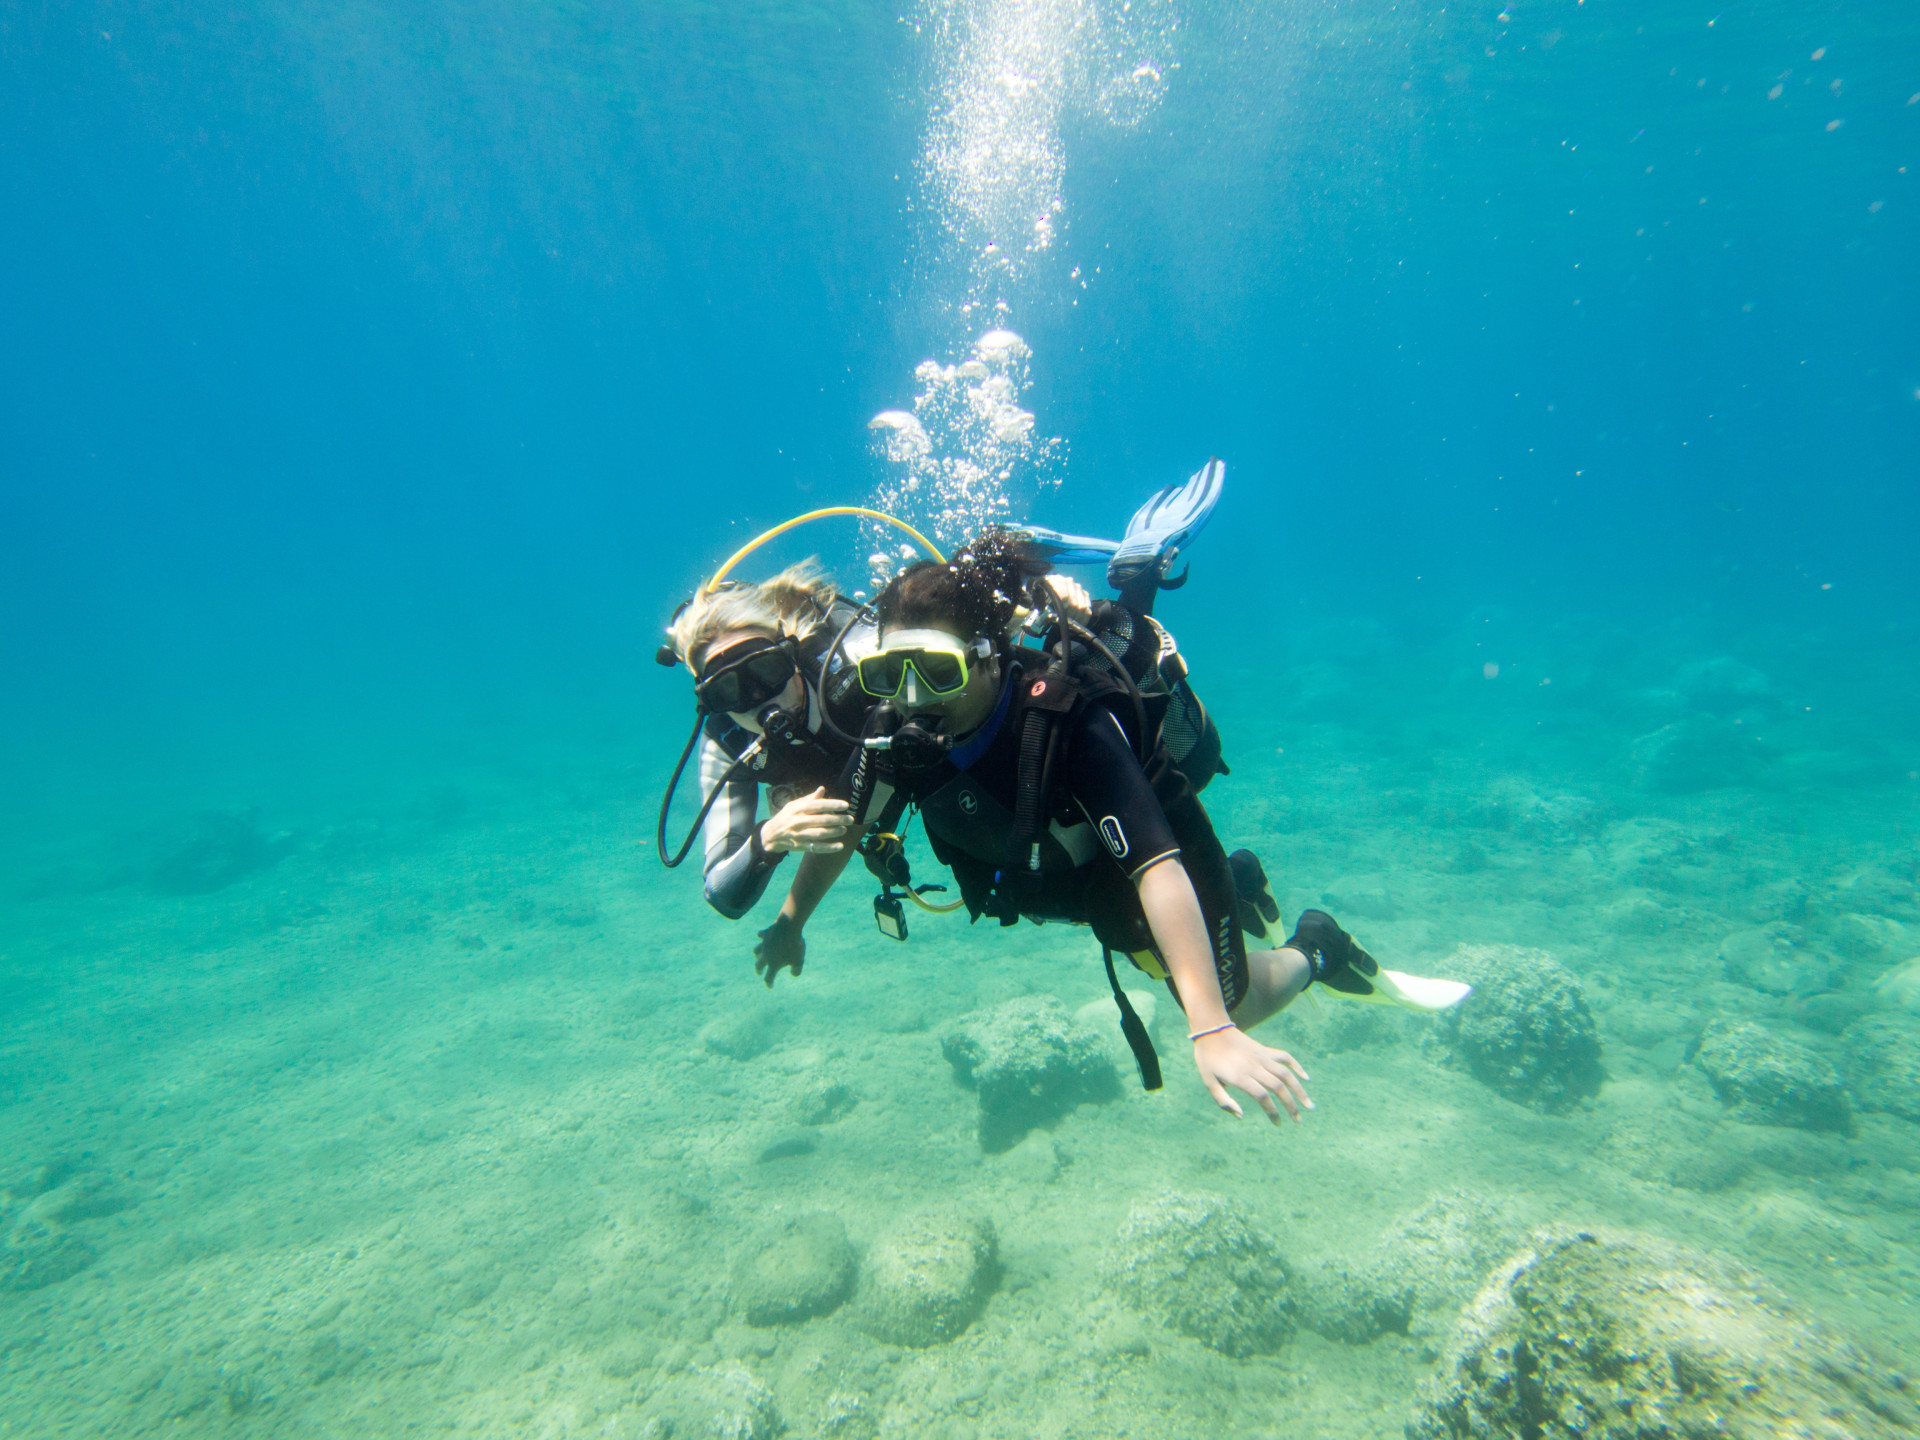 If you're into diving and traveling the world, then becoming an instructor is a great way to combine both.<p><a href="https://www.msn.com/en-sg/community/channel/vid-7xx8mnucu55yw63we9va2gwr7uihbxwc68fxqp25x6tg4ftibpra?cvid=94631541bc0f4f89bfd59158d696ad7e">Follow us and access great exclusive content every day</a></p>